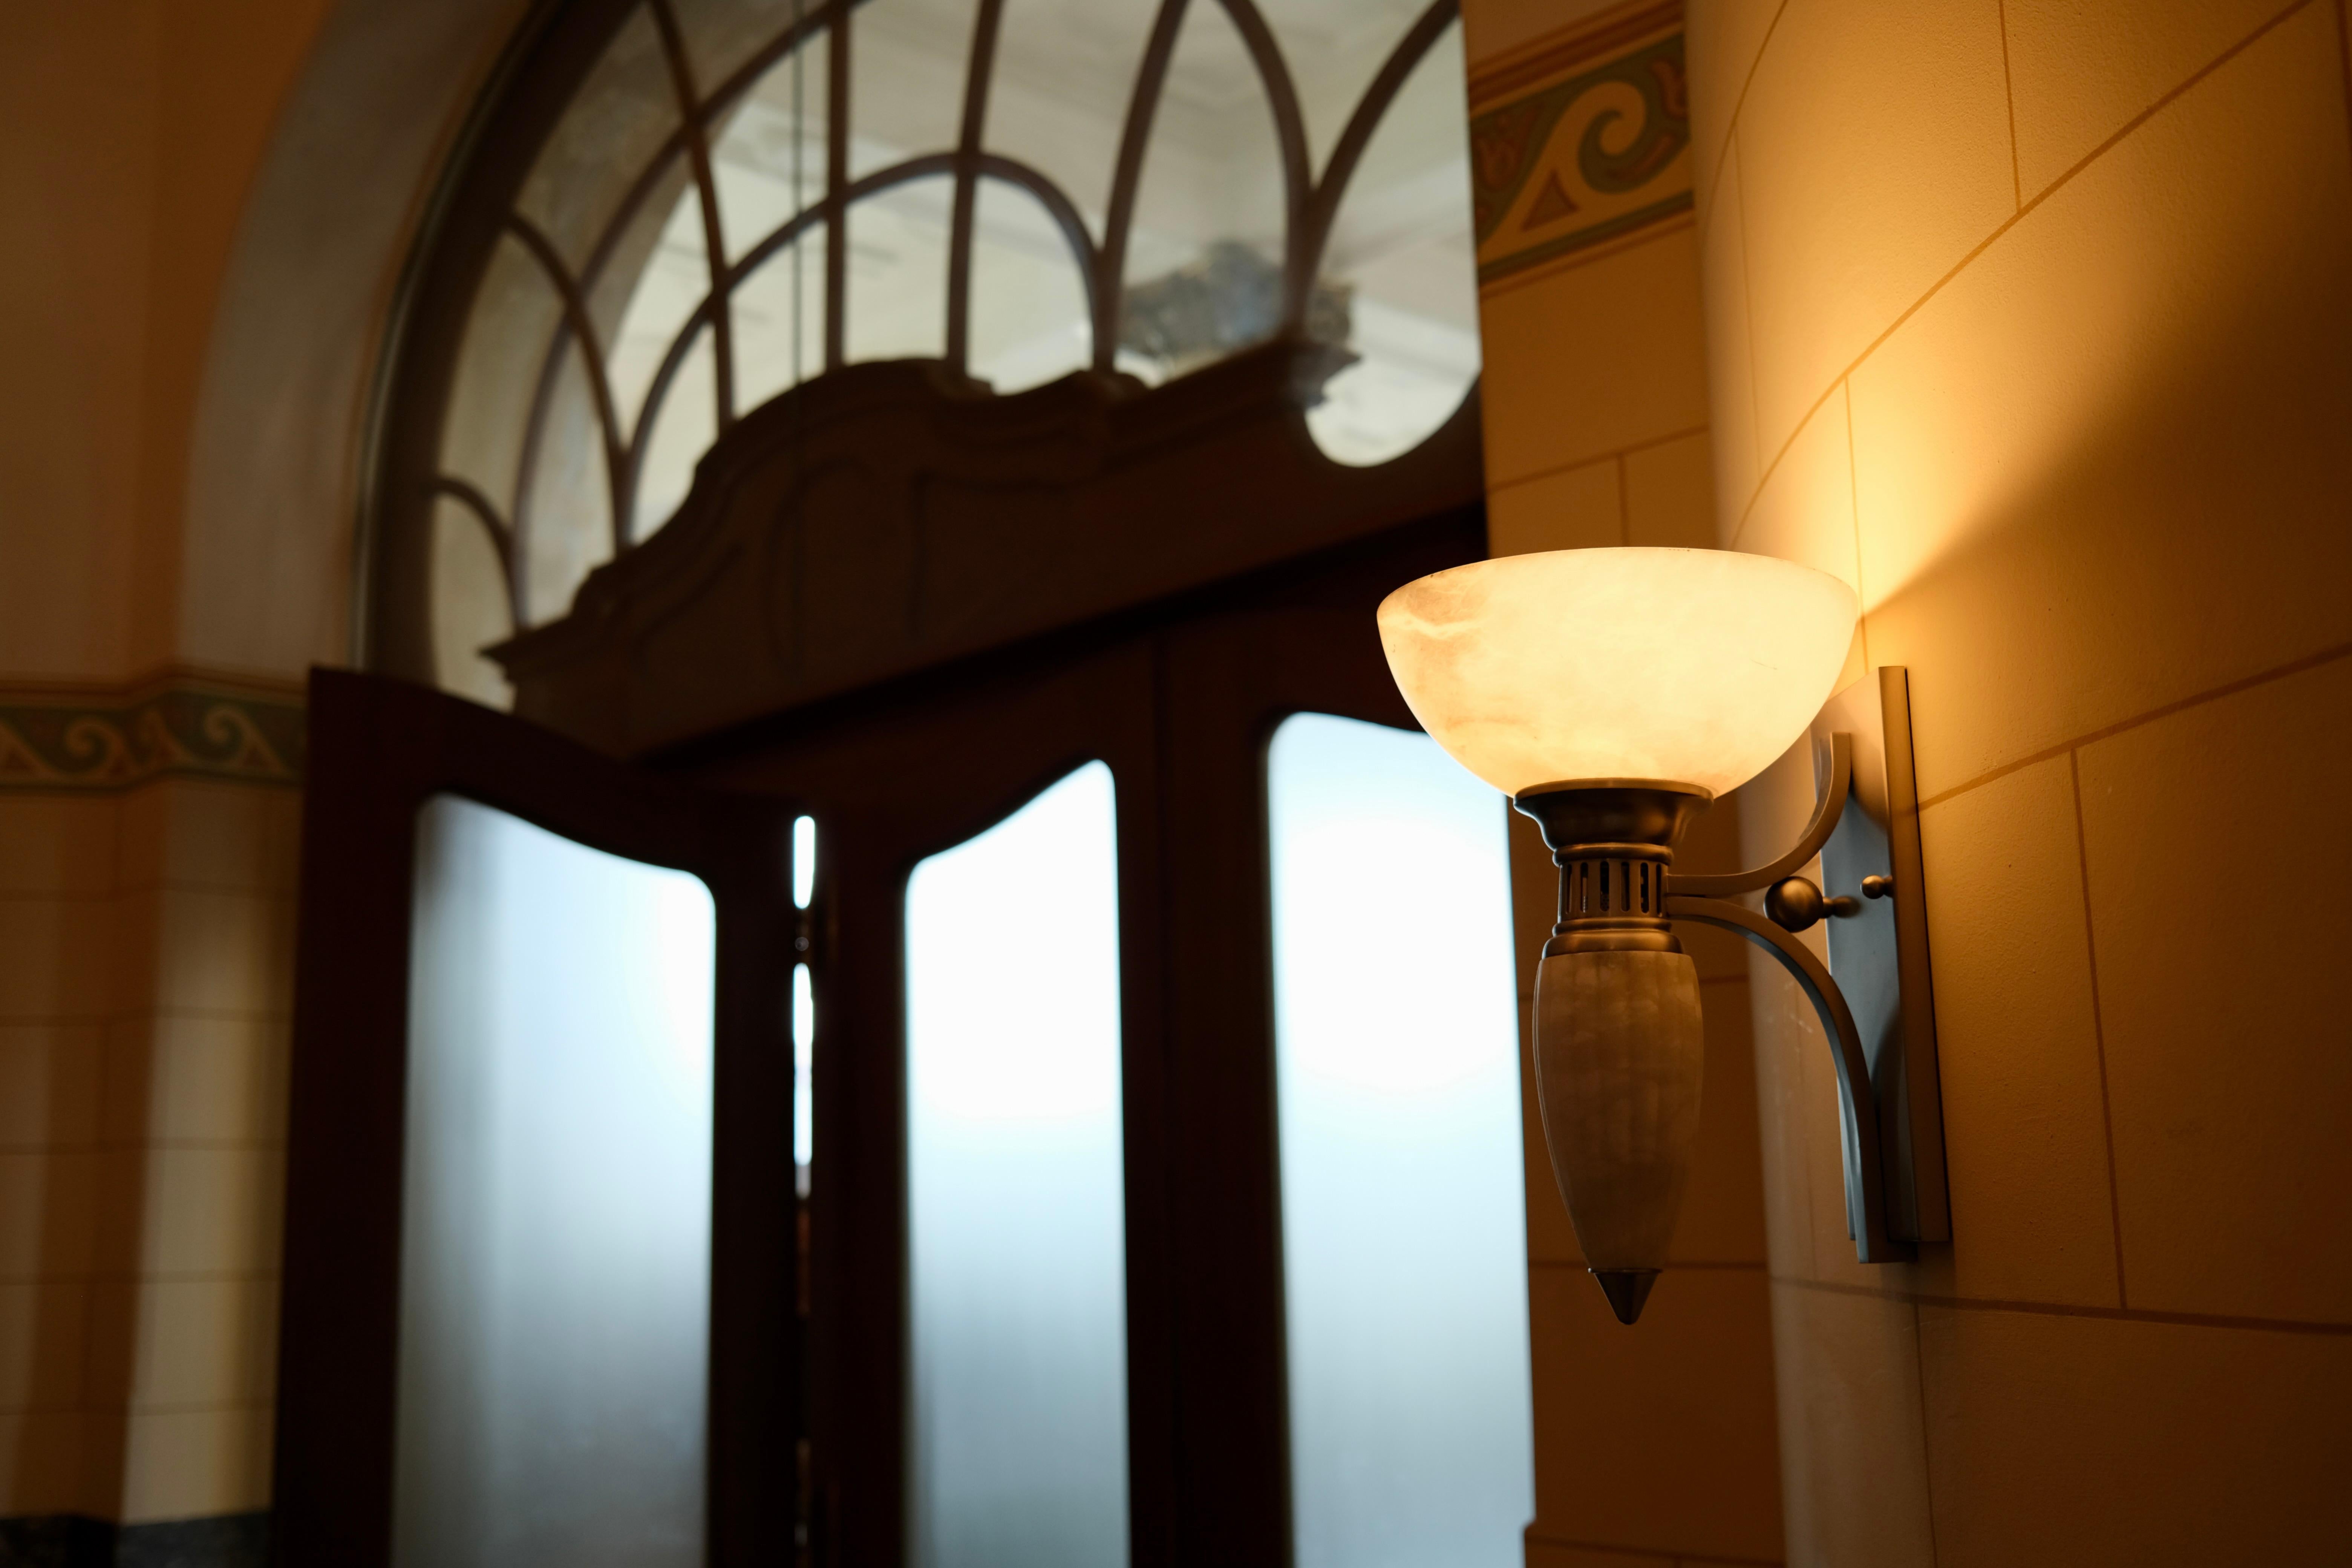 For many years, this Art Deco Style wall lamps adorned the corridors of the prestigious 5-star Grand Hotel 